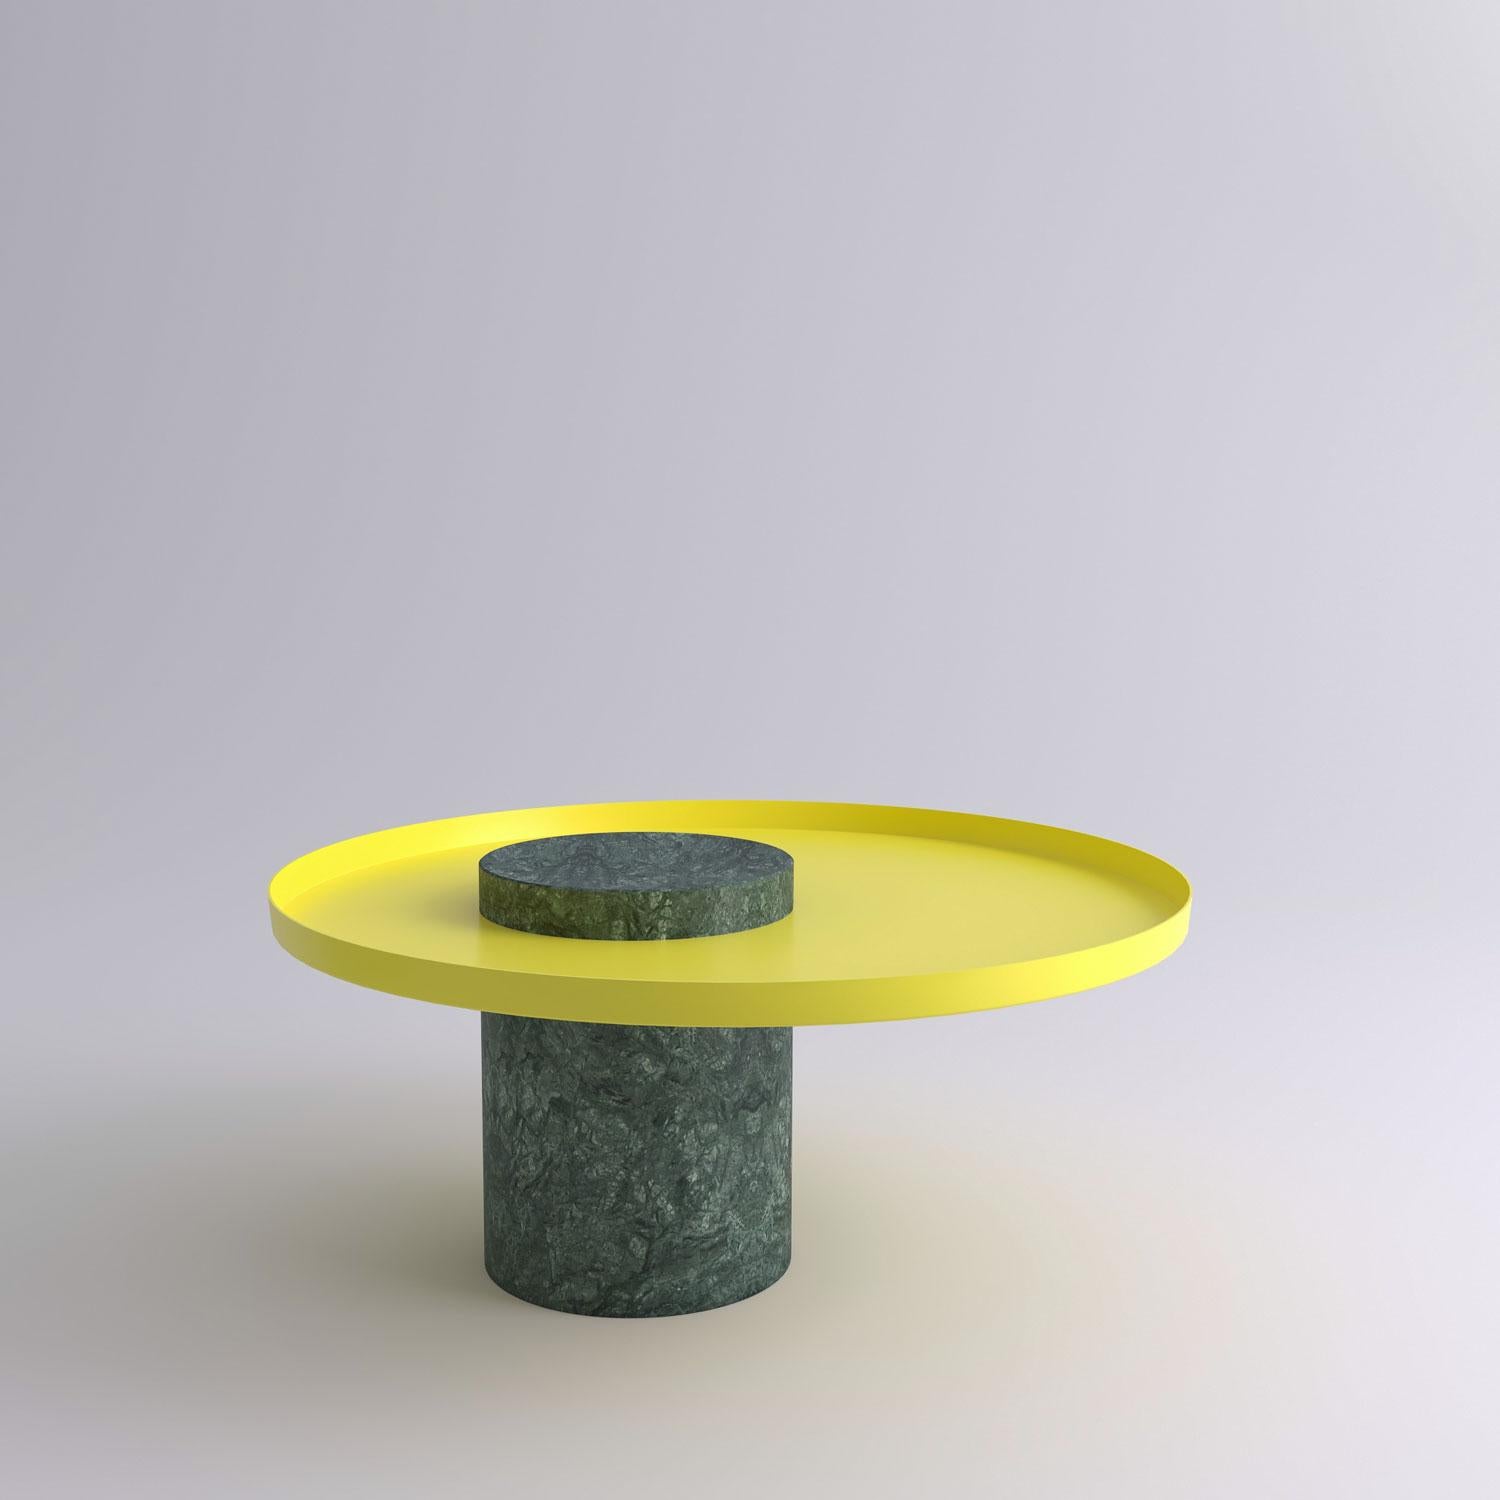 Low indian green marble contemporary guéridon, Sebastian Herkner
Dimensions: D 70 x H 33 cm
Materials: Indian Green marble, yellow metal tray

The salute table exists in 3 sizes, 4 different marble stones for the column and 5 different finishes